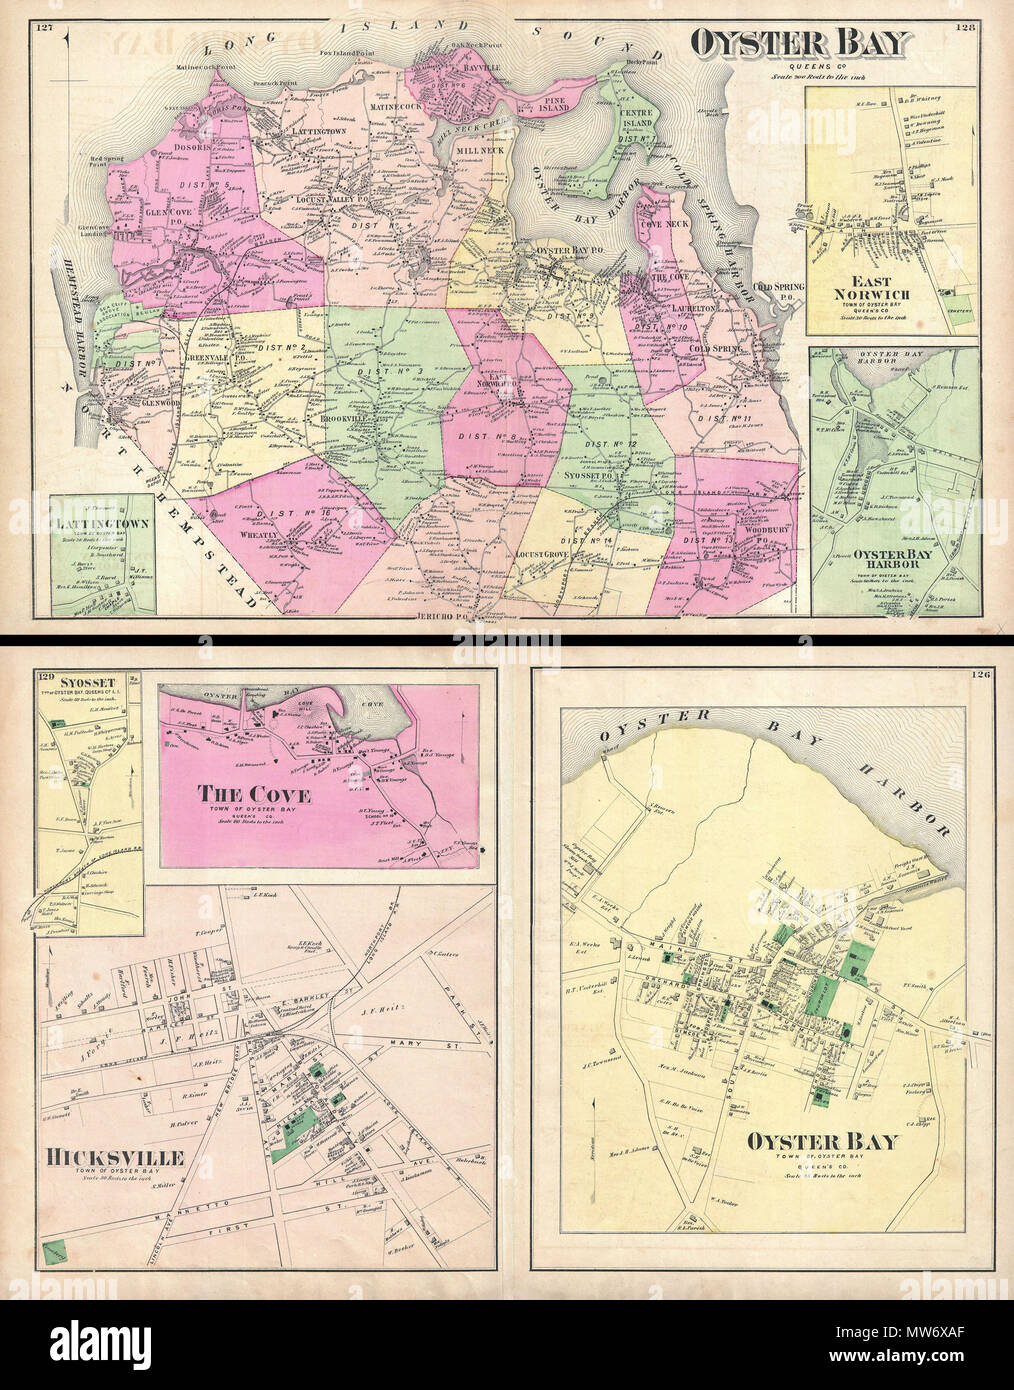 . Oyster Bay, Queens Co. - Oyster Bay, Town of Oyster Bay, Queens Co. - Hicksville, Town of Oyster Bay.  English: A scarce example of Fredrick W. Beers’ map of the Oyster Bay, Long Island, New York. Published in 1873. Oyster Bay side of map sheet covers from Hempstead Harbor eastward as far as Cold Spring Harbor. Bounded on the north by the Long Island Sound. Extends southward as far as Jericho. Inset maps depict Lattingtown, East Norwich, and Oyster Bay Harbor. Detailed to the level of individual buildings and properties. Includes the Northport and the Glen Cove Branches of the Long Island Ra Stock Photo